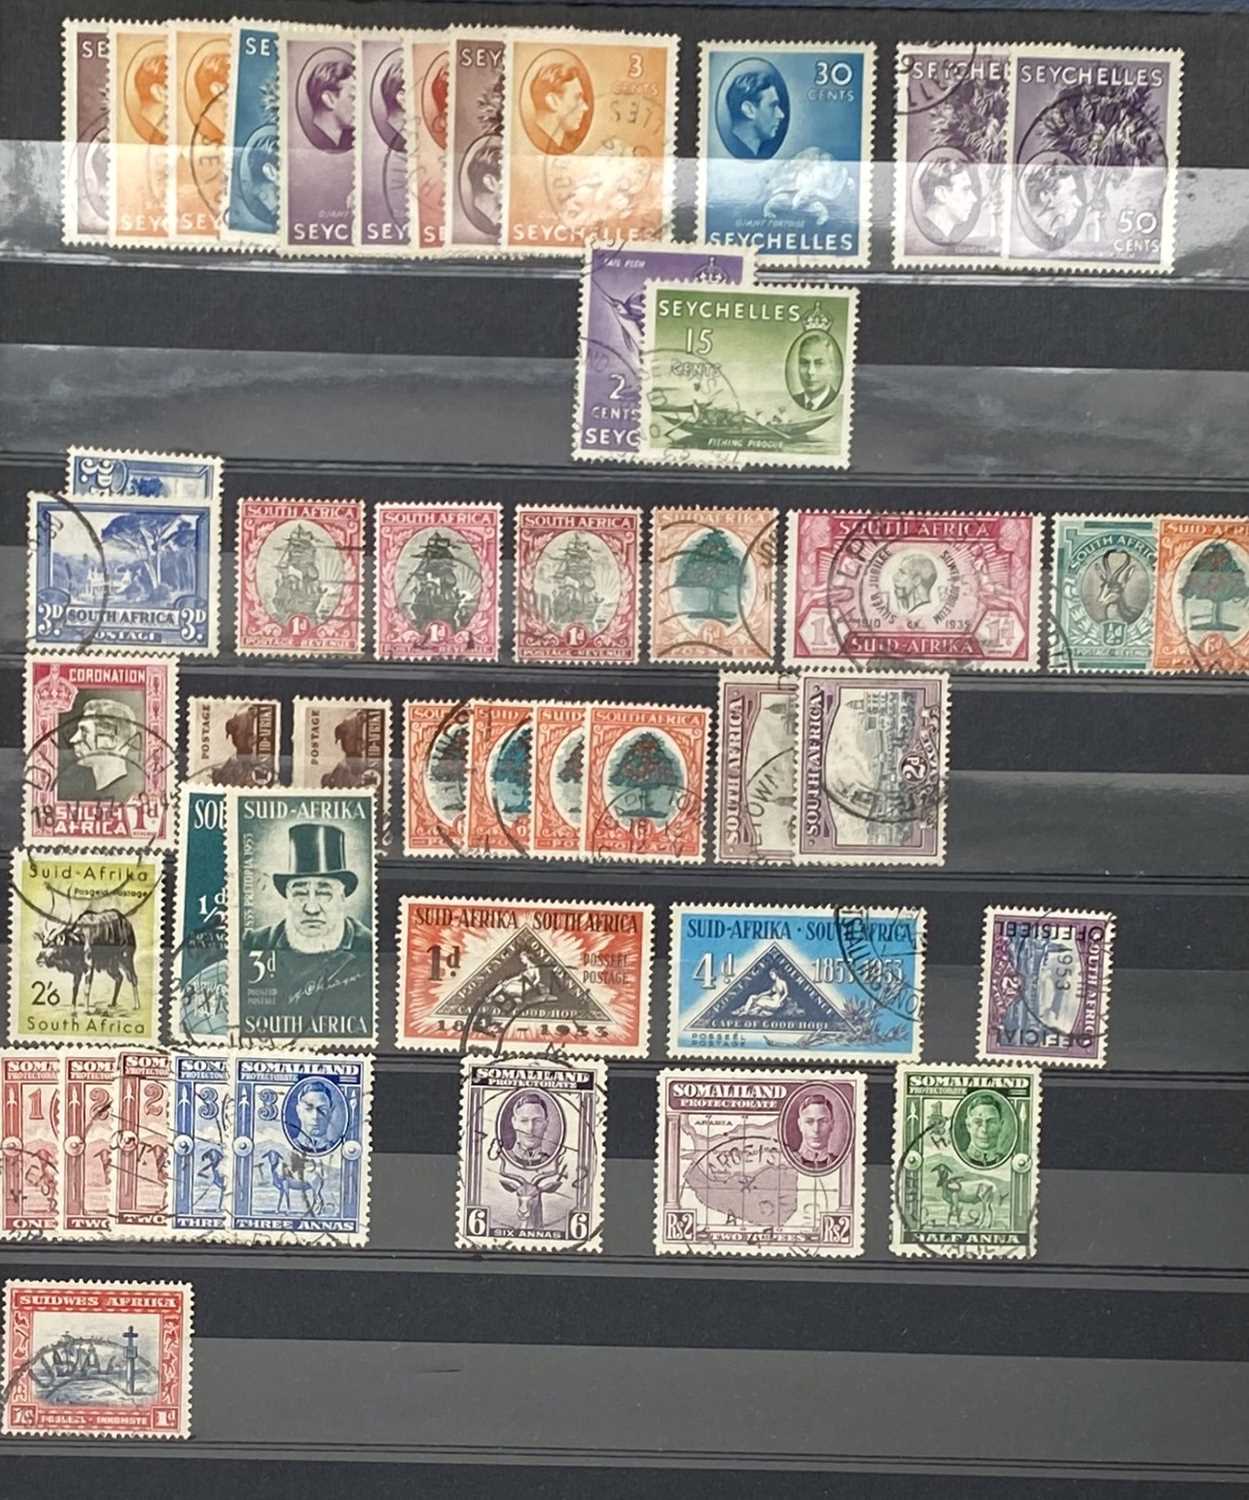 COMMONWEALTH GV1 - fine used collection of many countries, full sets and top values, good quality - Image 3 of 17